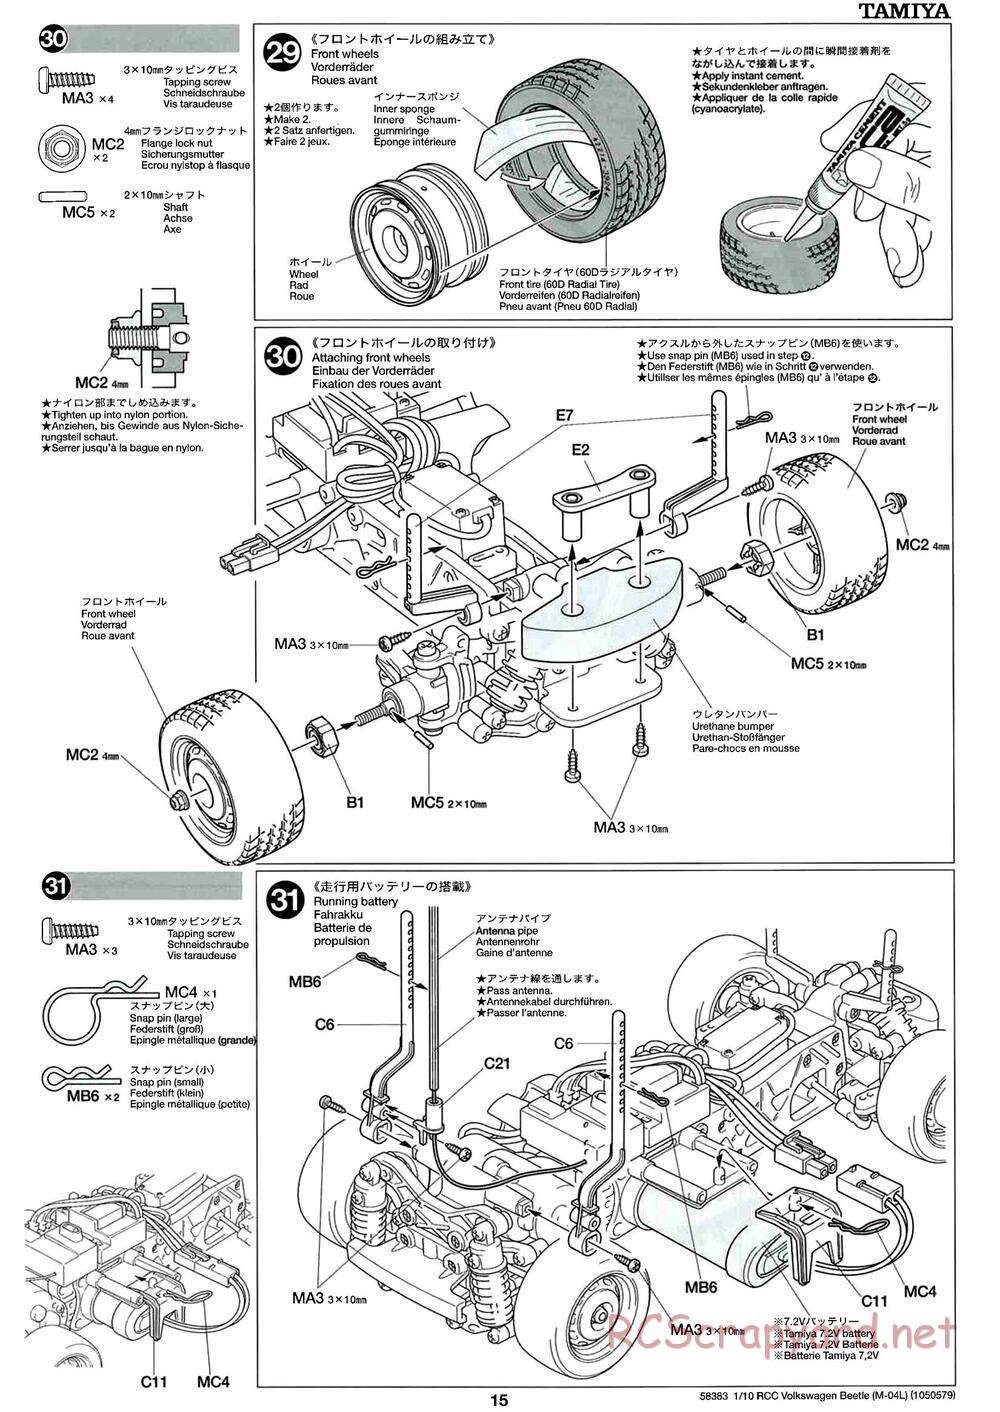 Tamiya - Volkswagen Beetle - M04L Chassis - Manual - Page 15